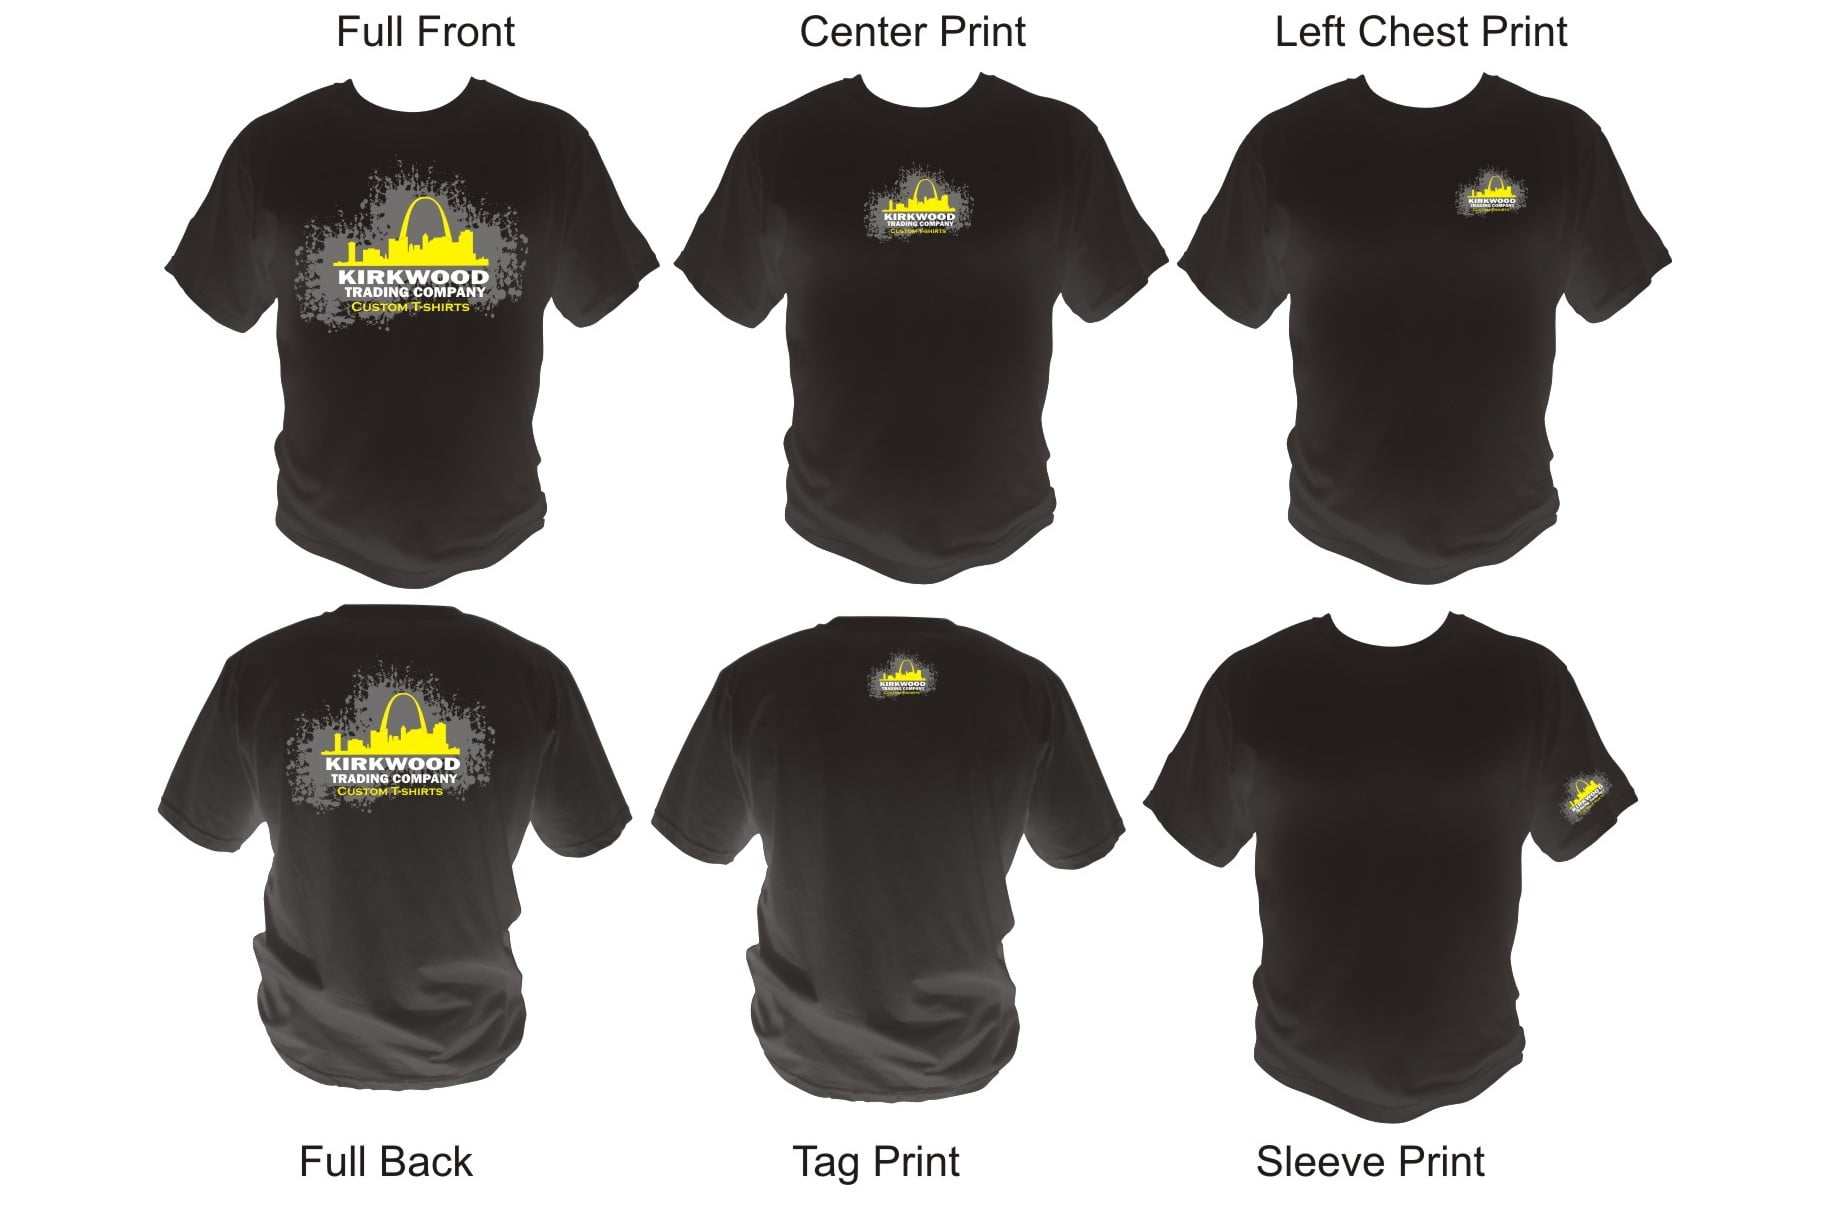 logo-placement-guide-for-custom-t-shirt-printing